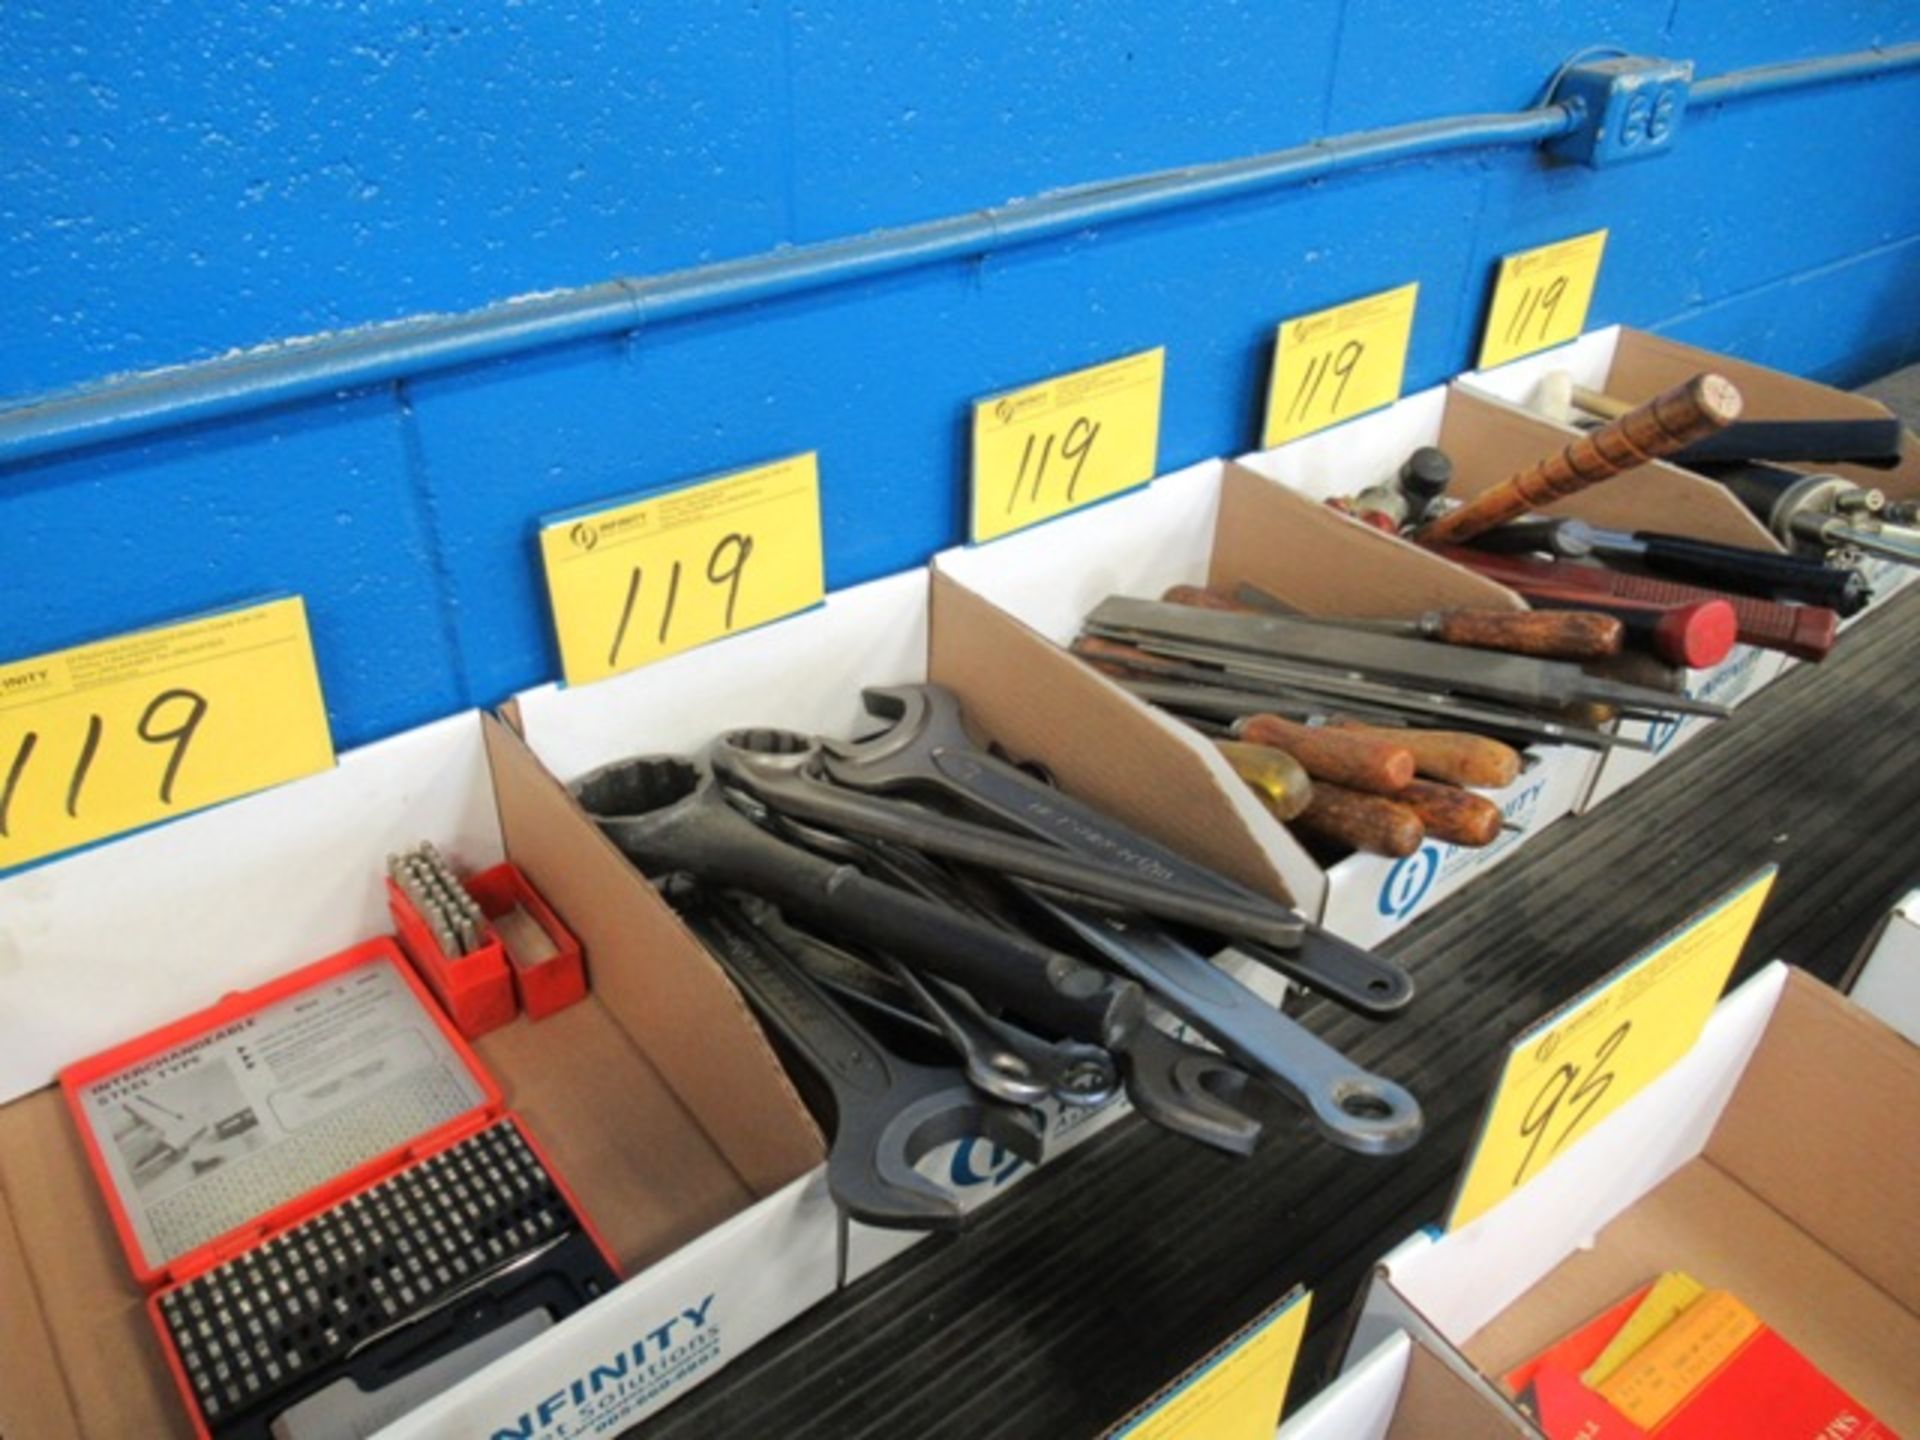 LOT ASST. WRENCHES, LETTER & # SETS, HAMMERS, FILES, ETC. (5 BOXES)